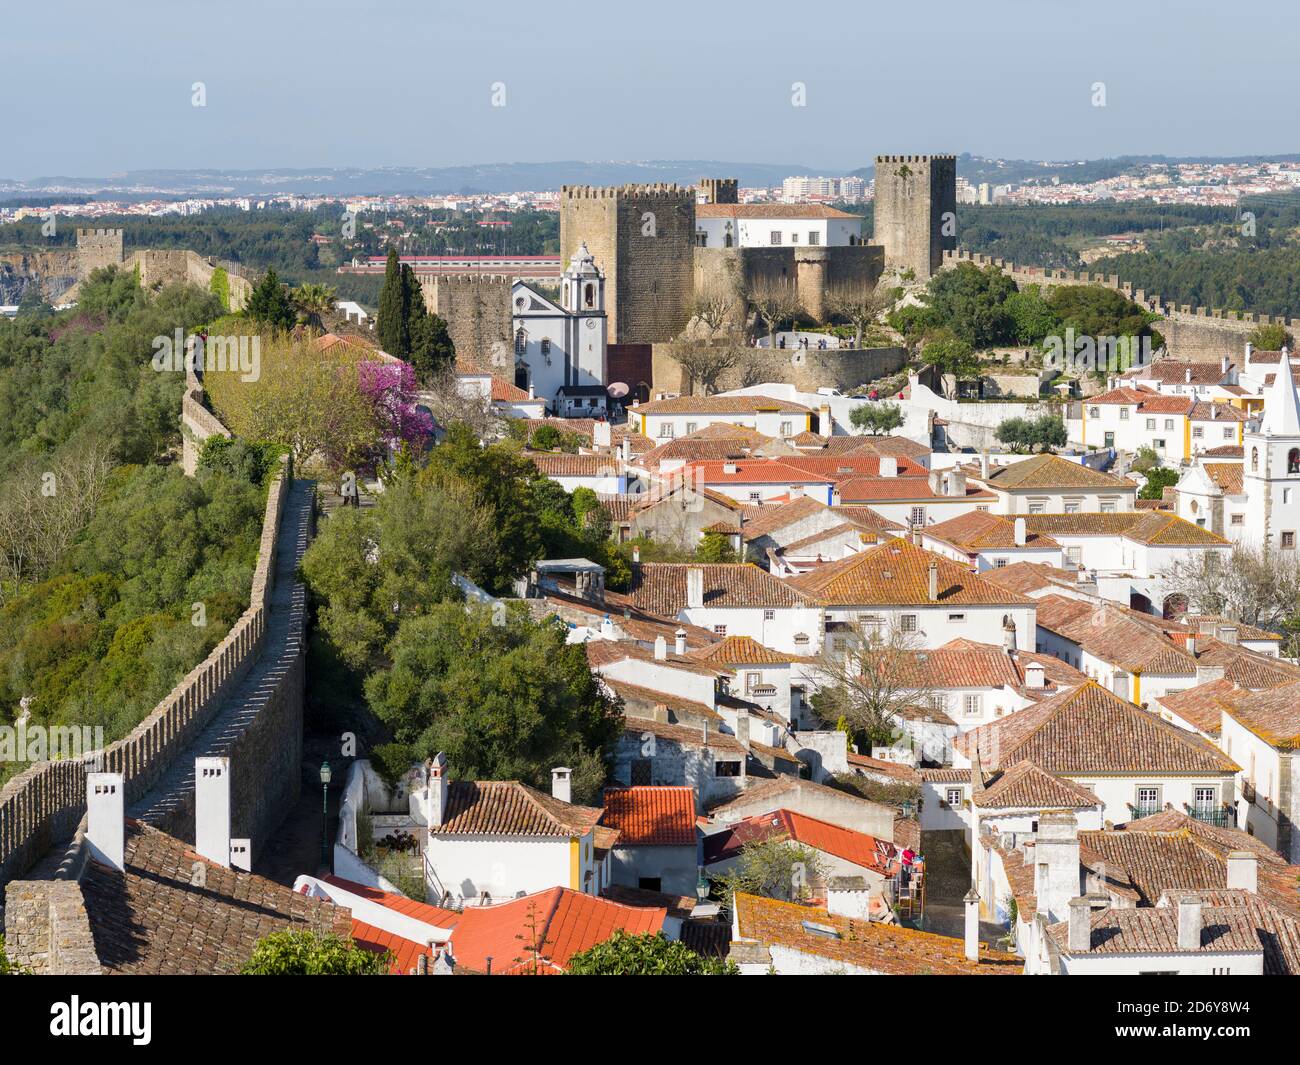 View over town. Historic small town Obidos with a medieval old town, a tourist attraction north of Lisboa  Europe, Southern Europe, Portugal Stock Photo